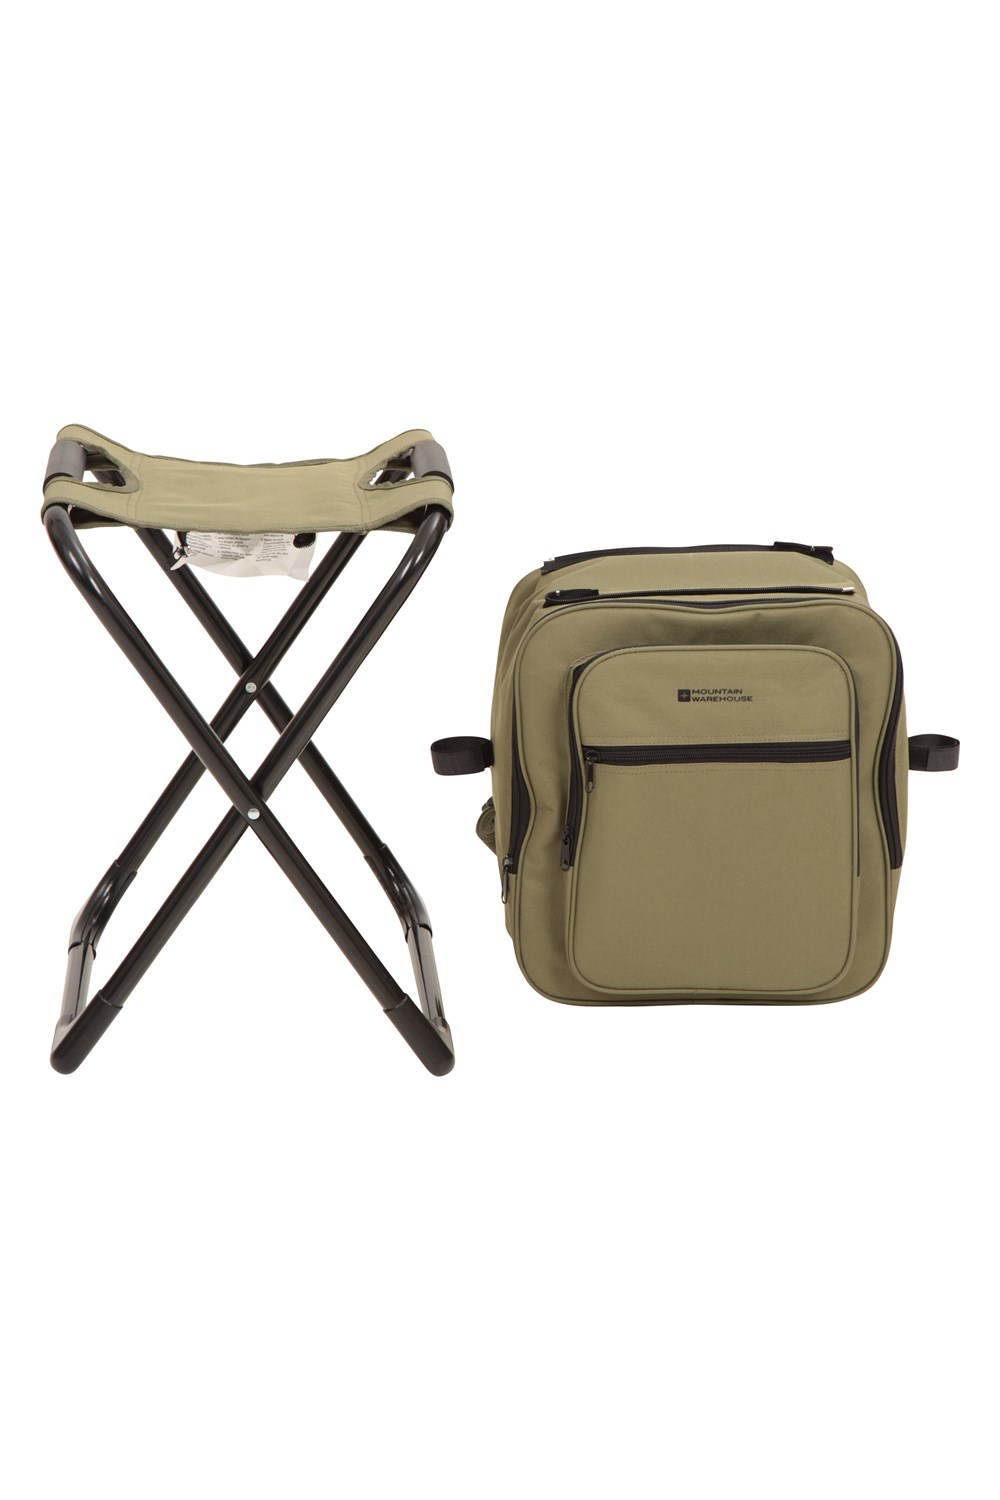 Mountain Warehouse Stool With Cool Bag - Lightweight Camping Chair, Fold Up Sofa | eBay